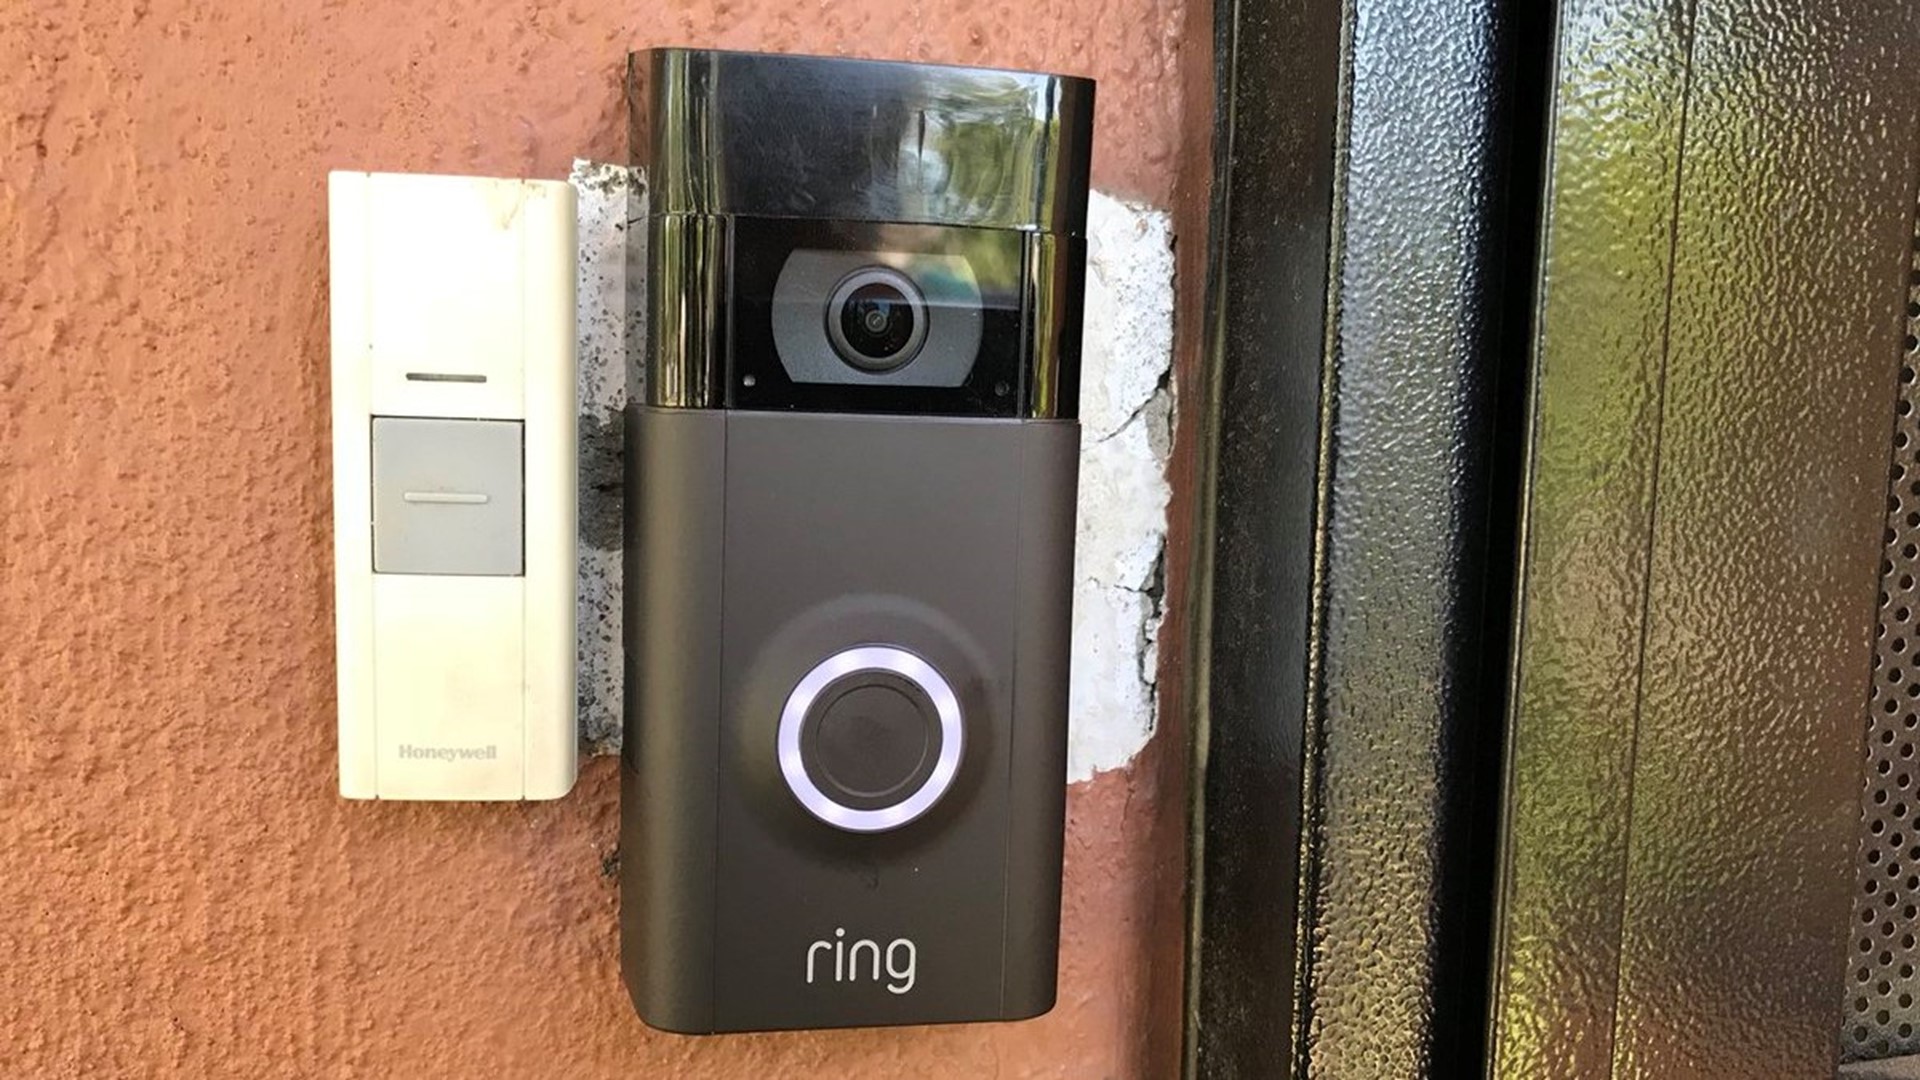 Modesto police have formed a partnership with a free app called 'Neighbors' by Ring as a way to easily share more videos and photos posted by homeowners.